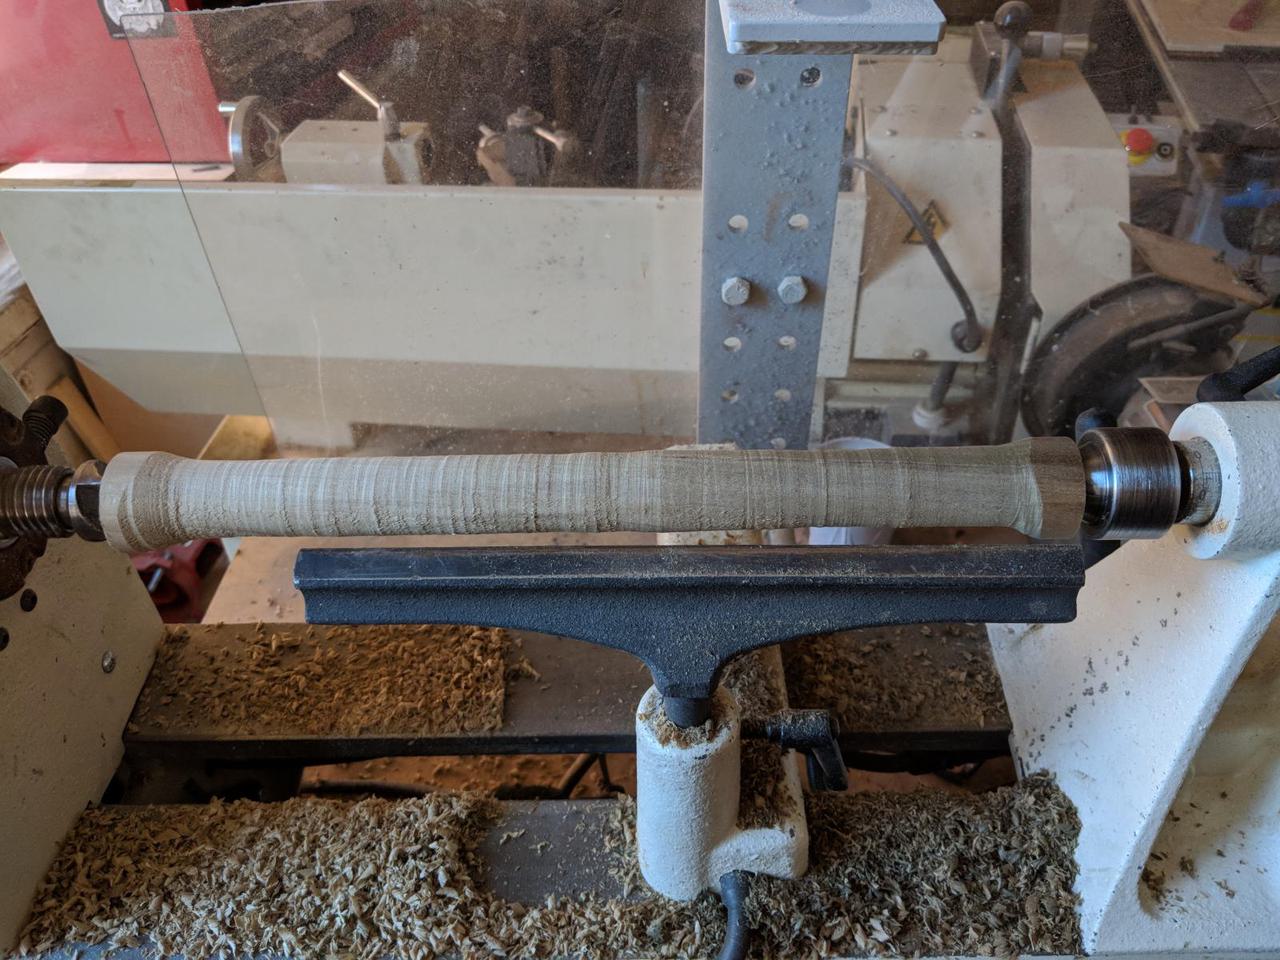 wooden cylinder mounted in wood lathe, with cylinder thinner than before and sawdust everywhere.